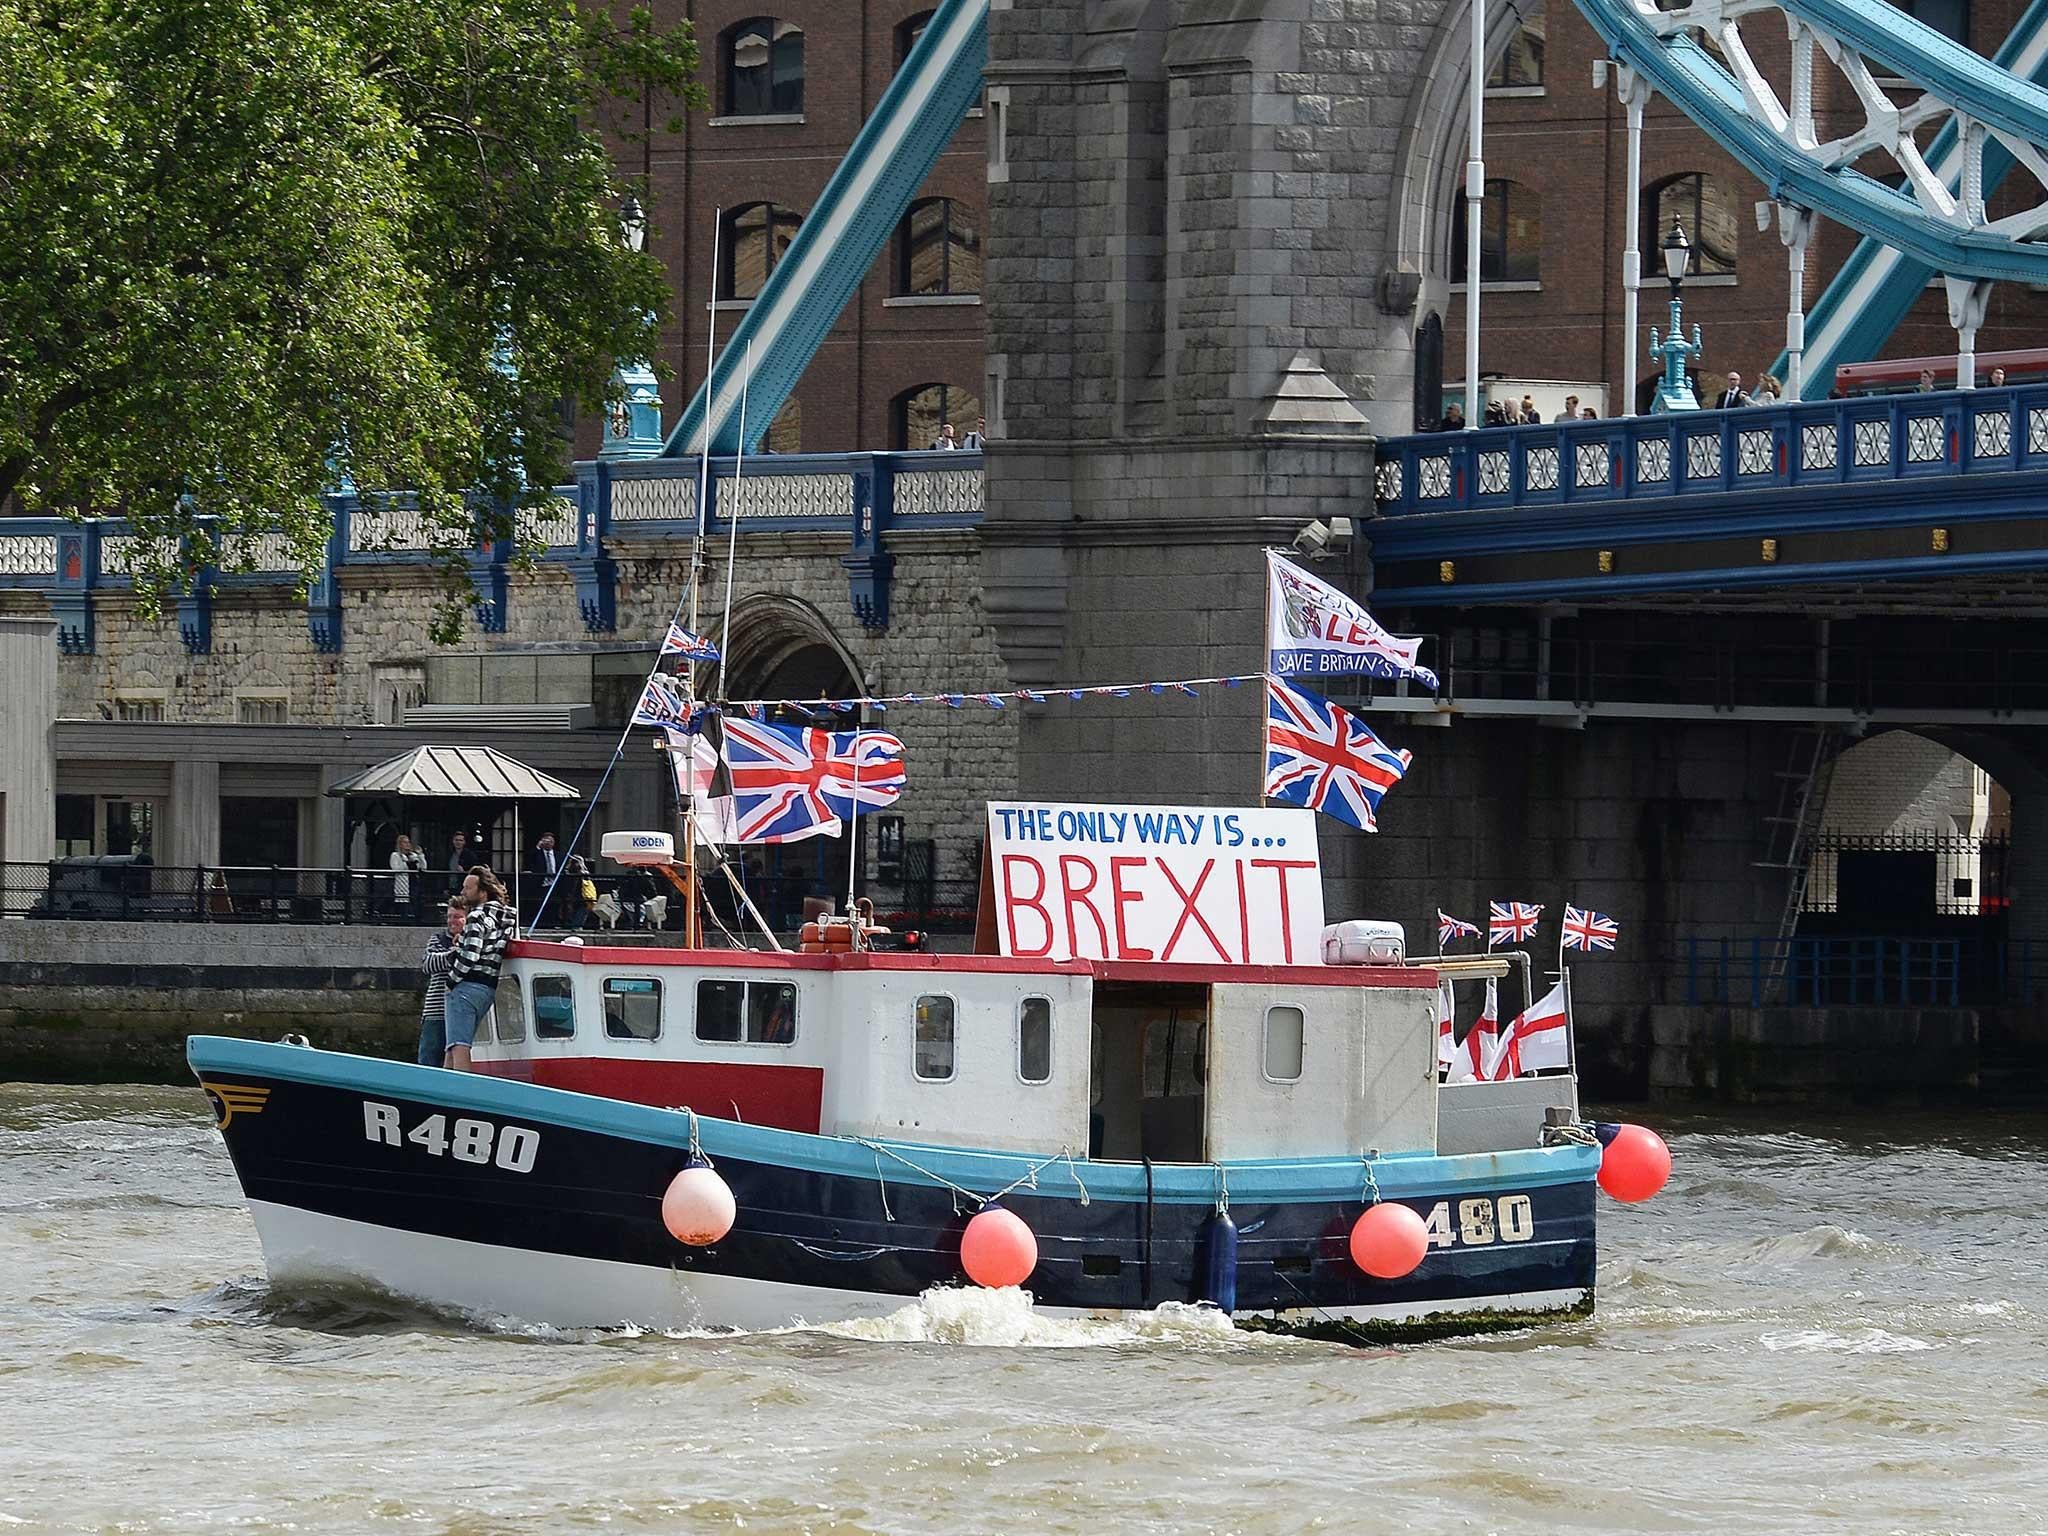 Flotillas filled the Thames yesterday, during a stand off between Remain and Leave campaigners